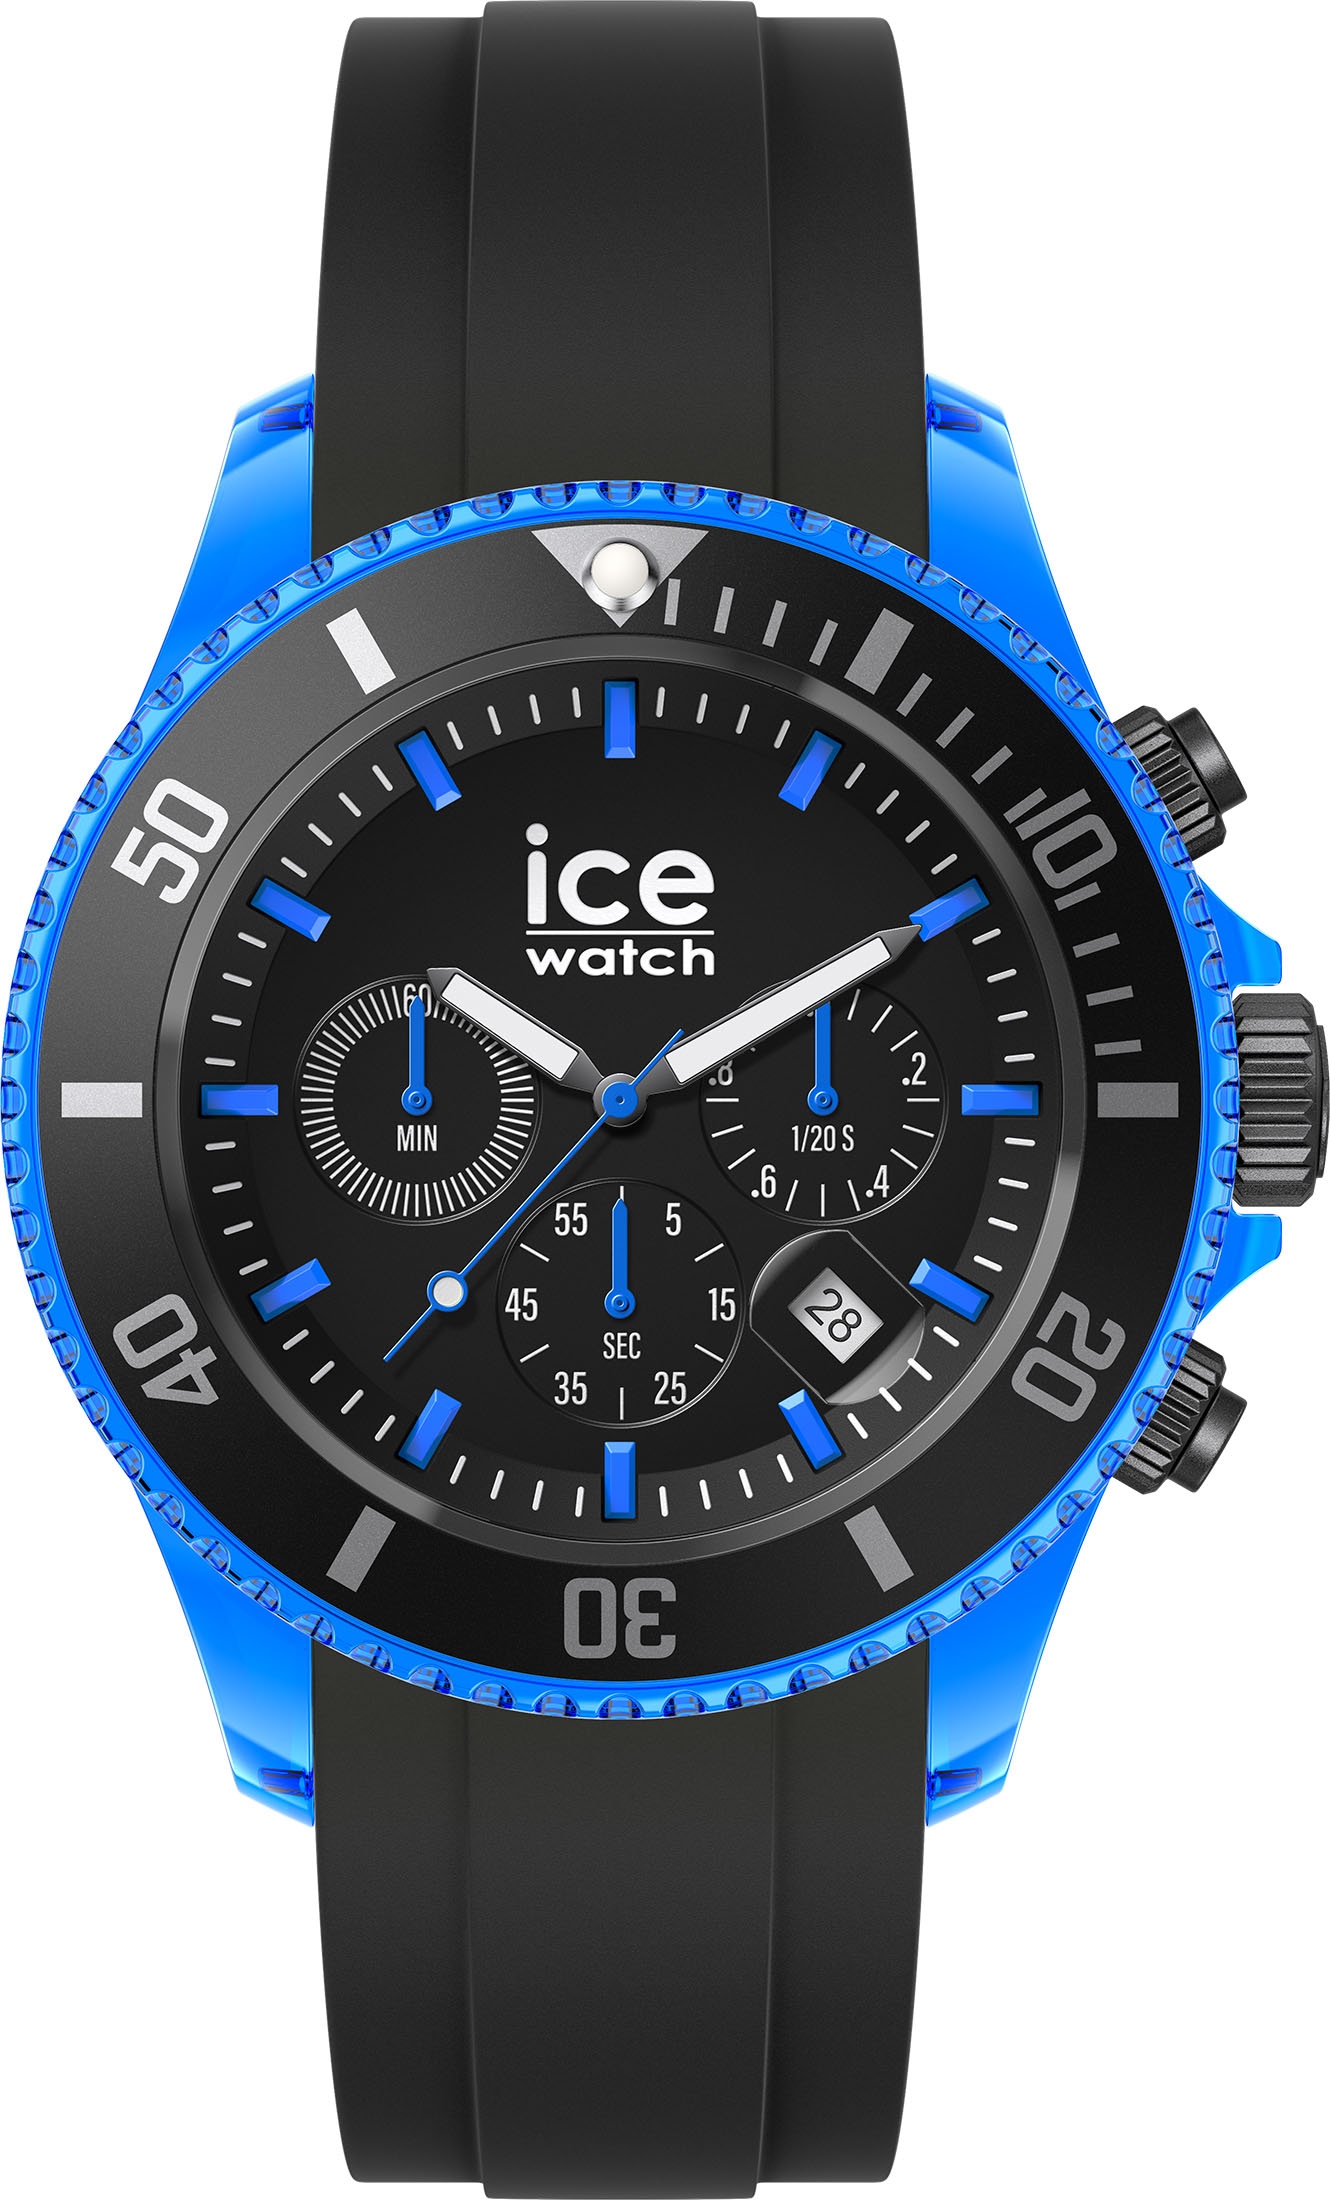 online OTTO »ICE blue - ice-watch Chronograph large bei - CH, 019844« - Extra chrono Black shoppen